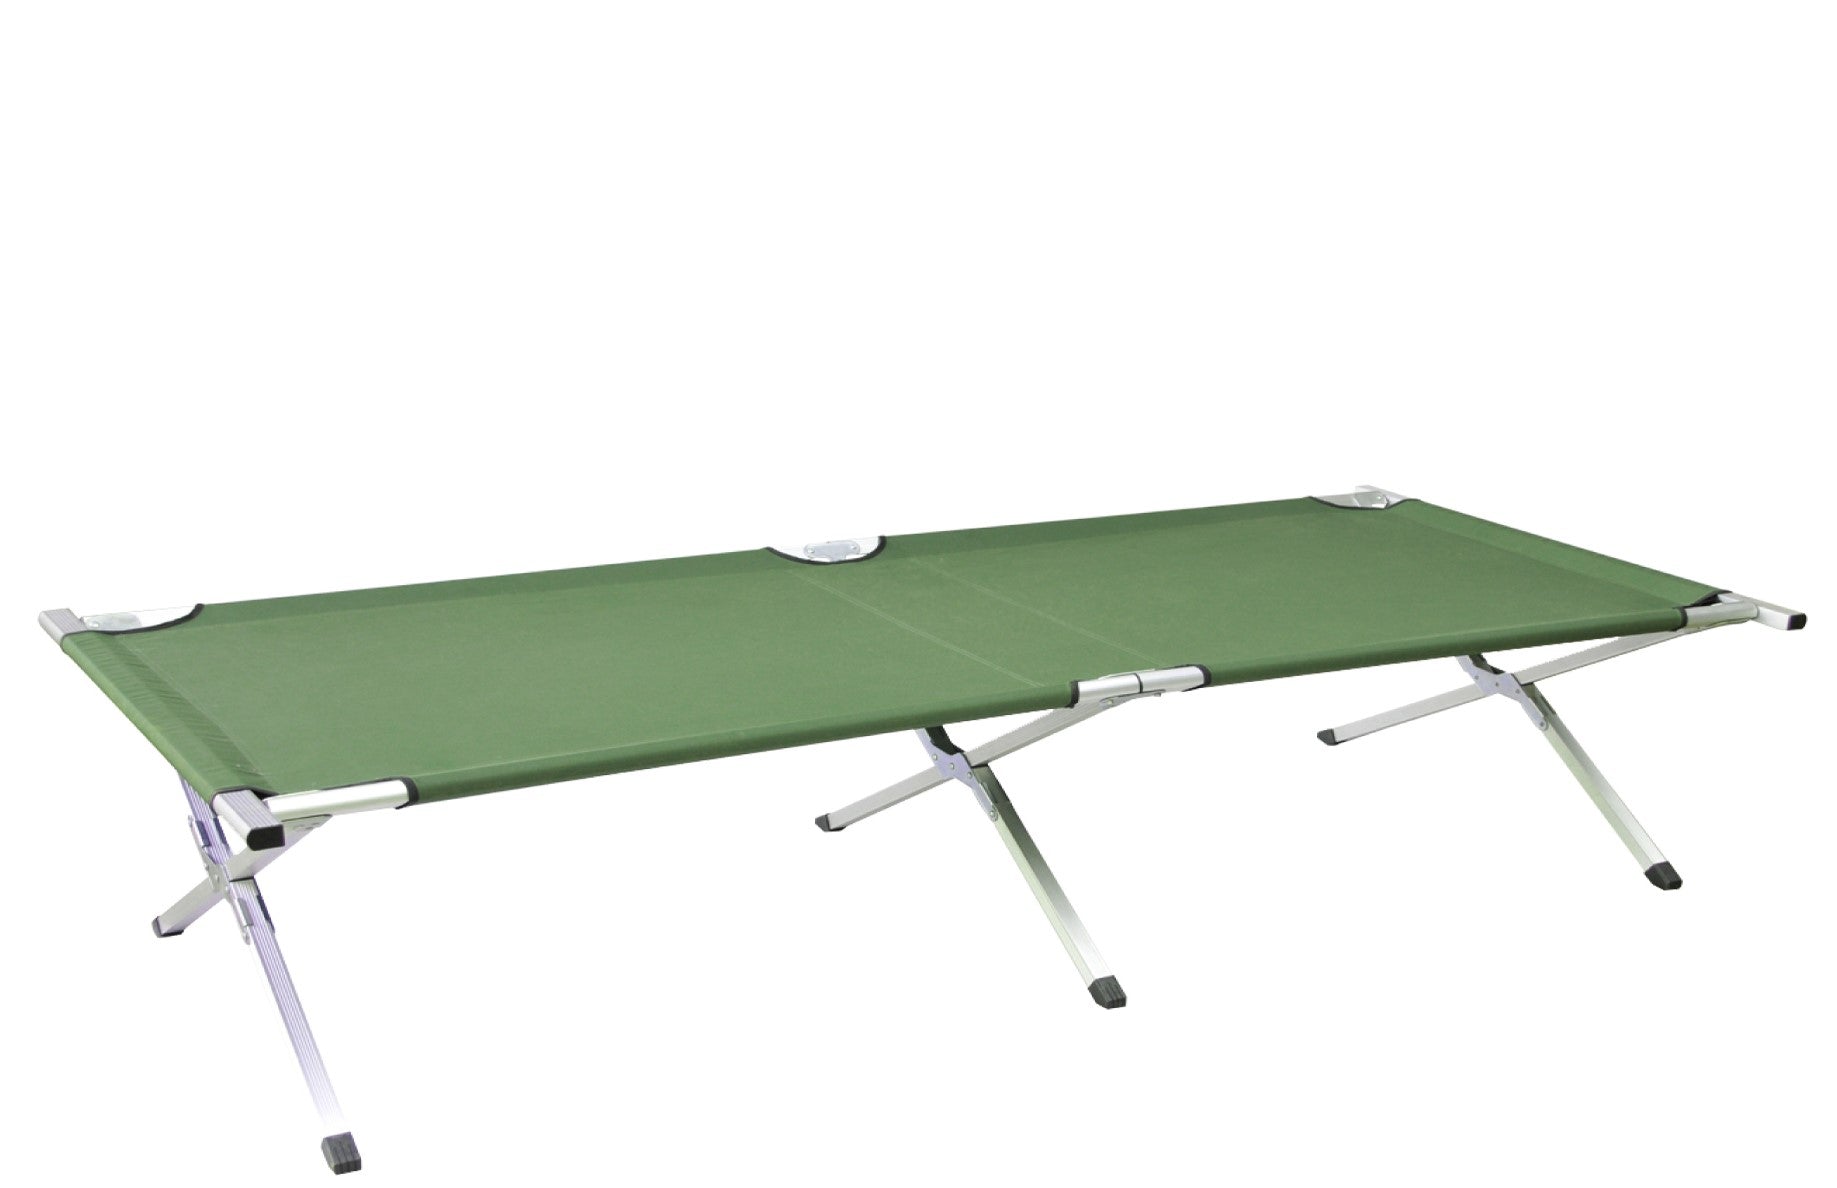 MediTac Camping Military Outdoors Bed Cot - Heavy Duty, Durable with Carry Storage Bag